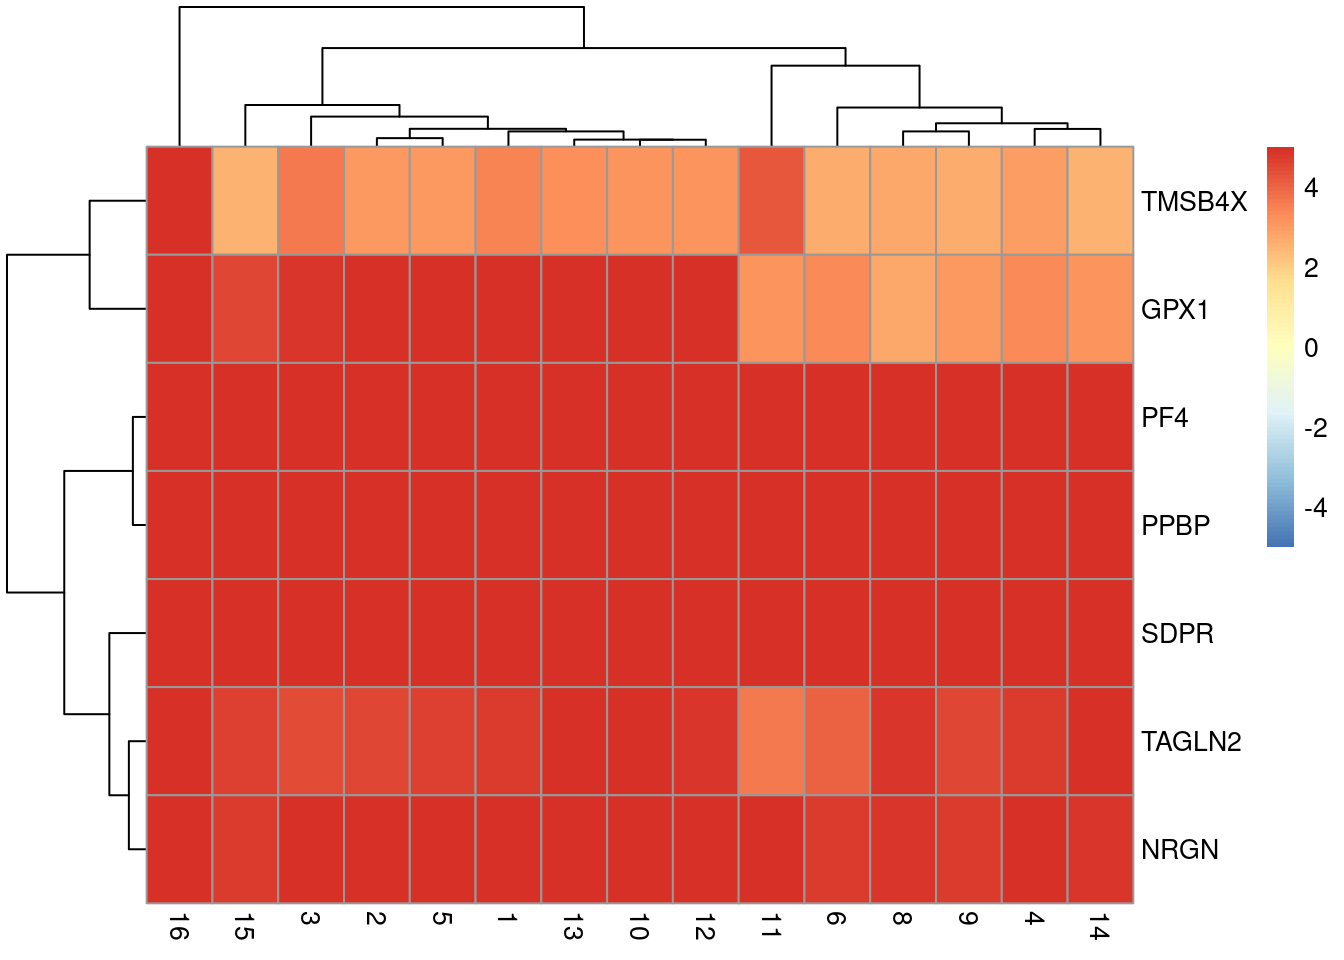 Heatmap of log-fold changes for cluster 7 over all other clusters. Colours are capped at -5 and 5 to preserve dynamic range.